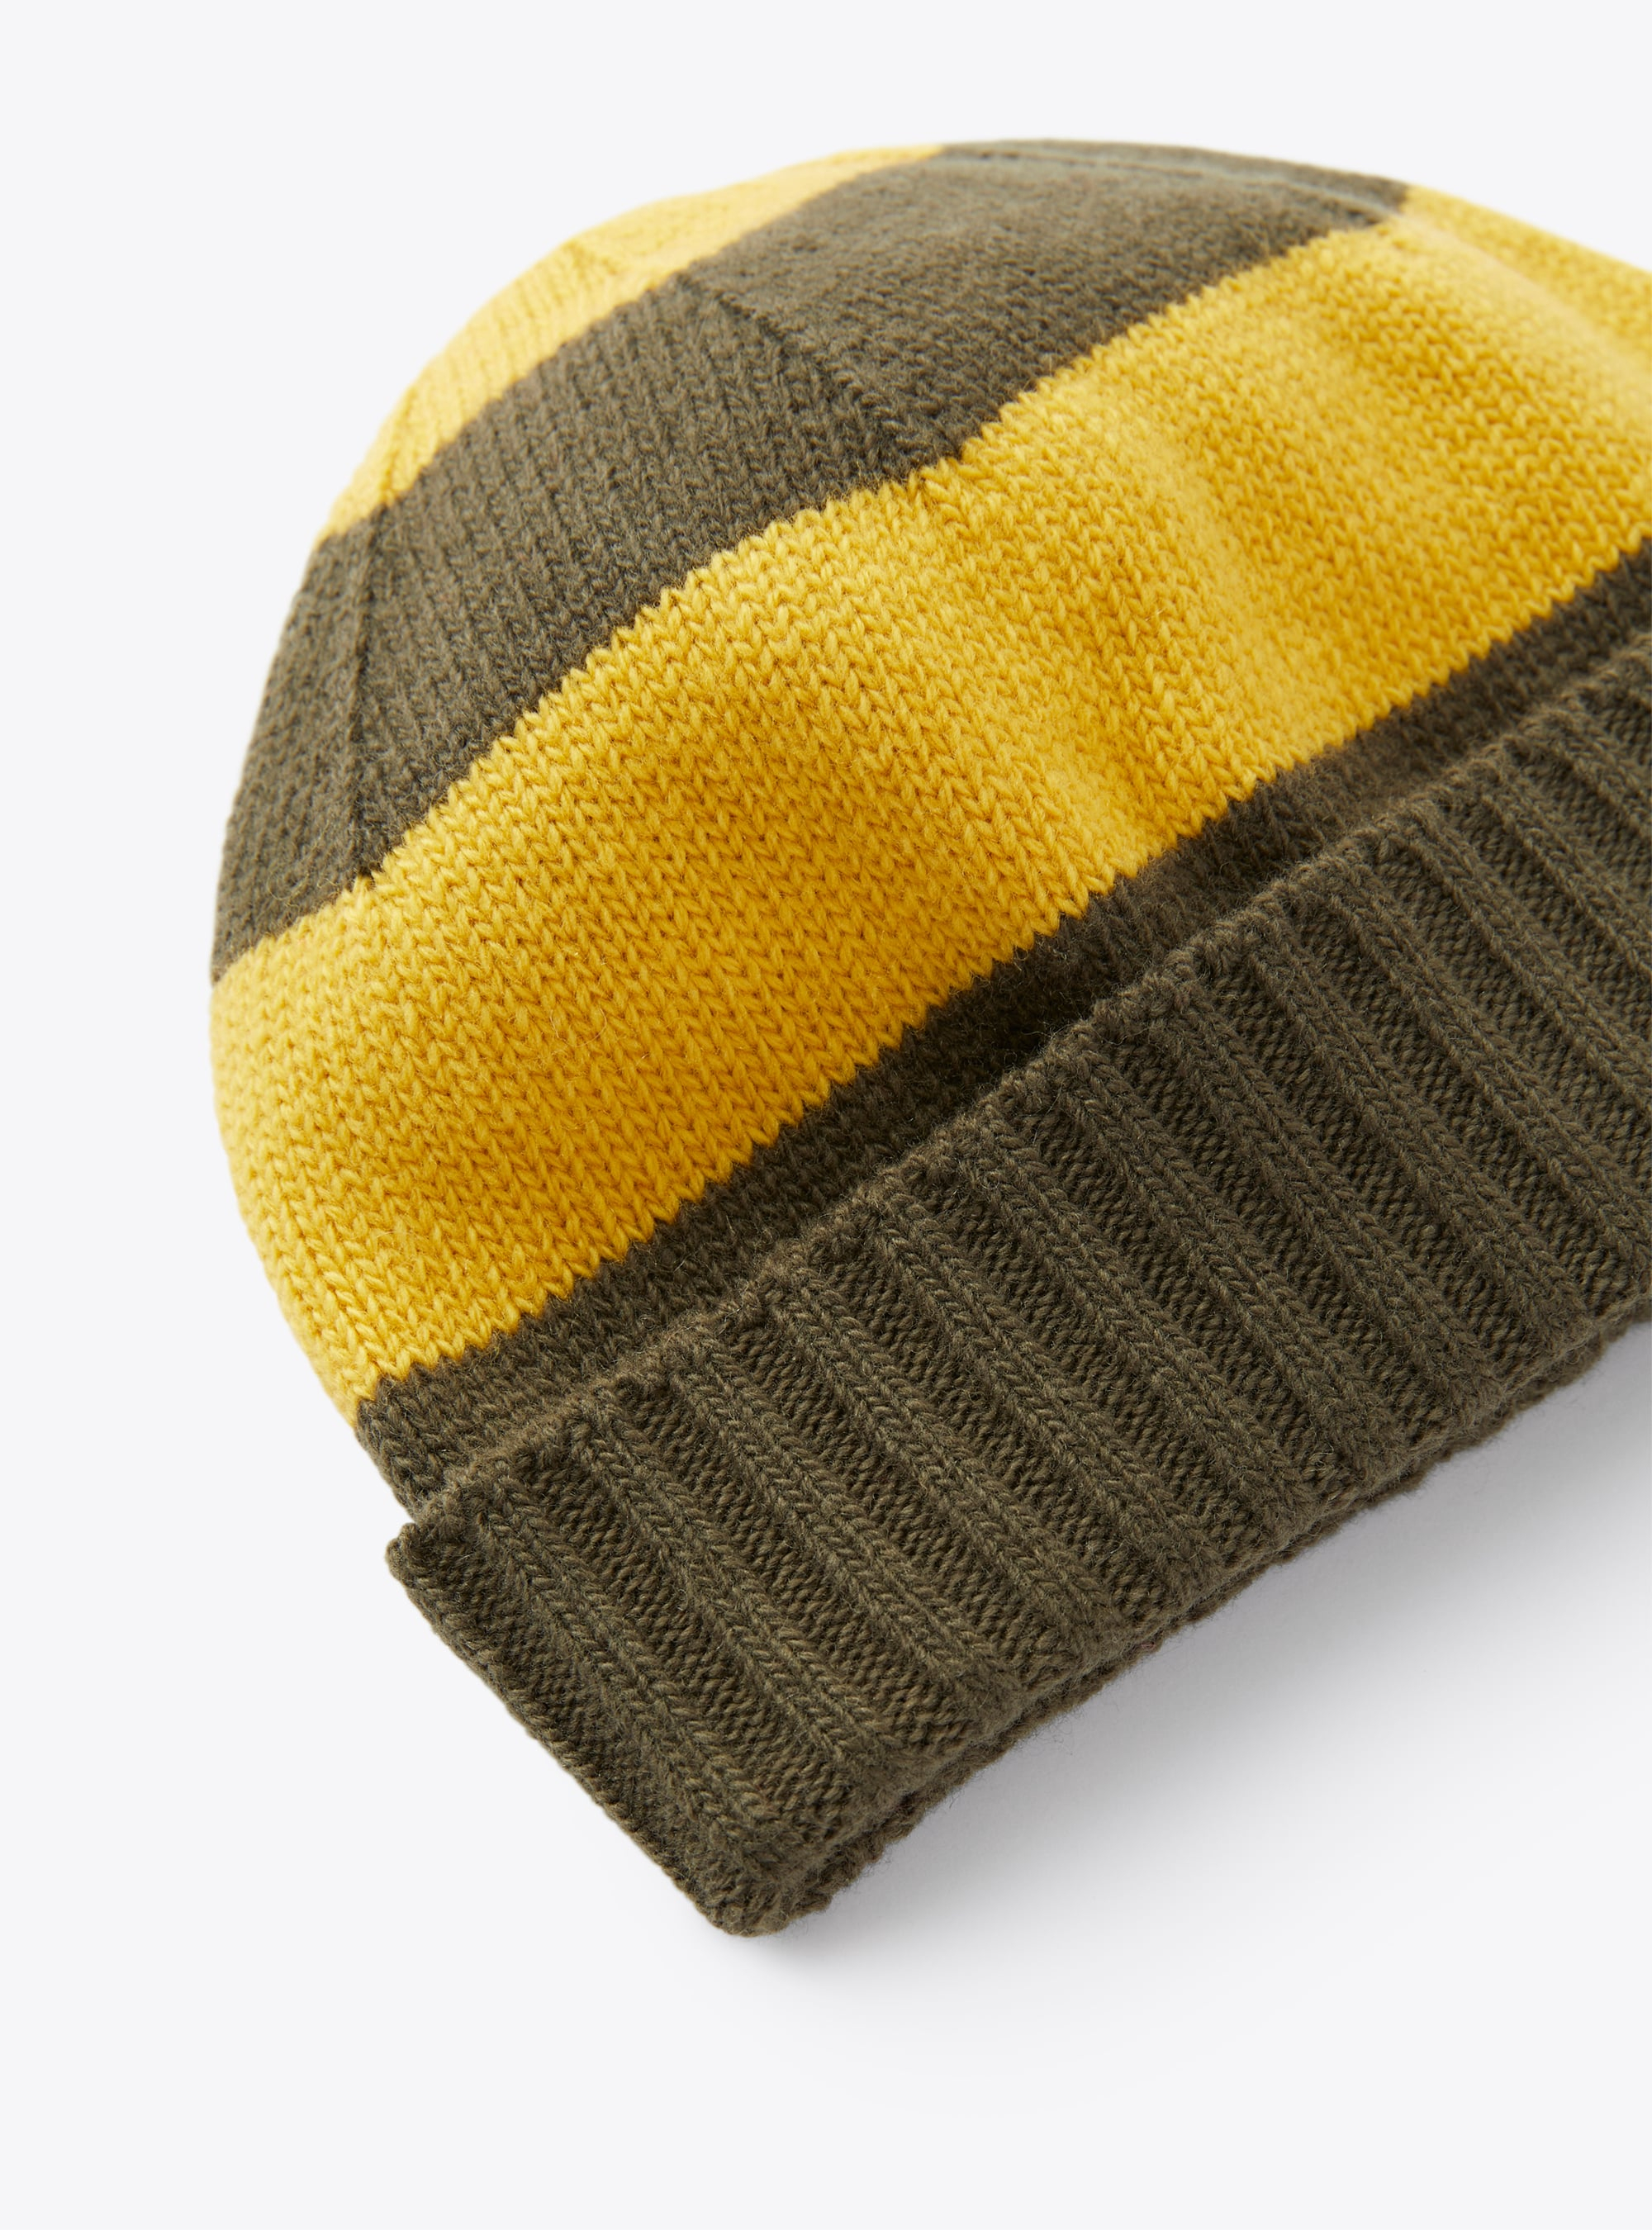 Tricot-knit hat in green and yellow stripes - Green | Il Gufo